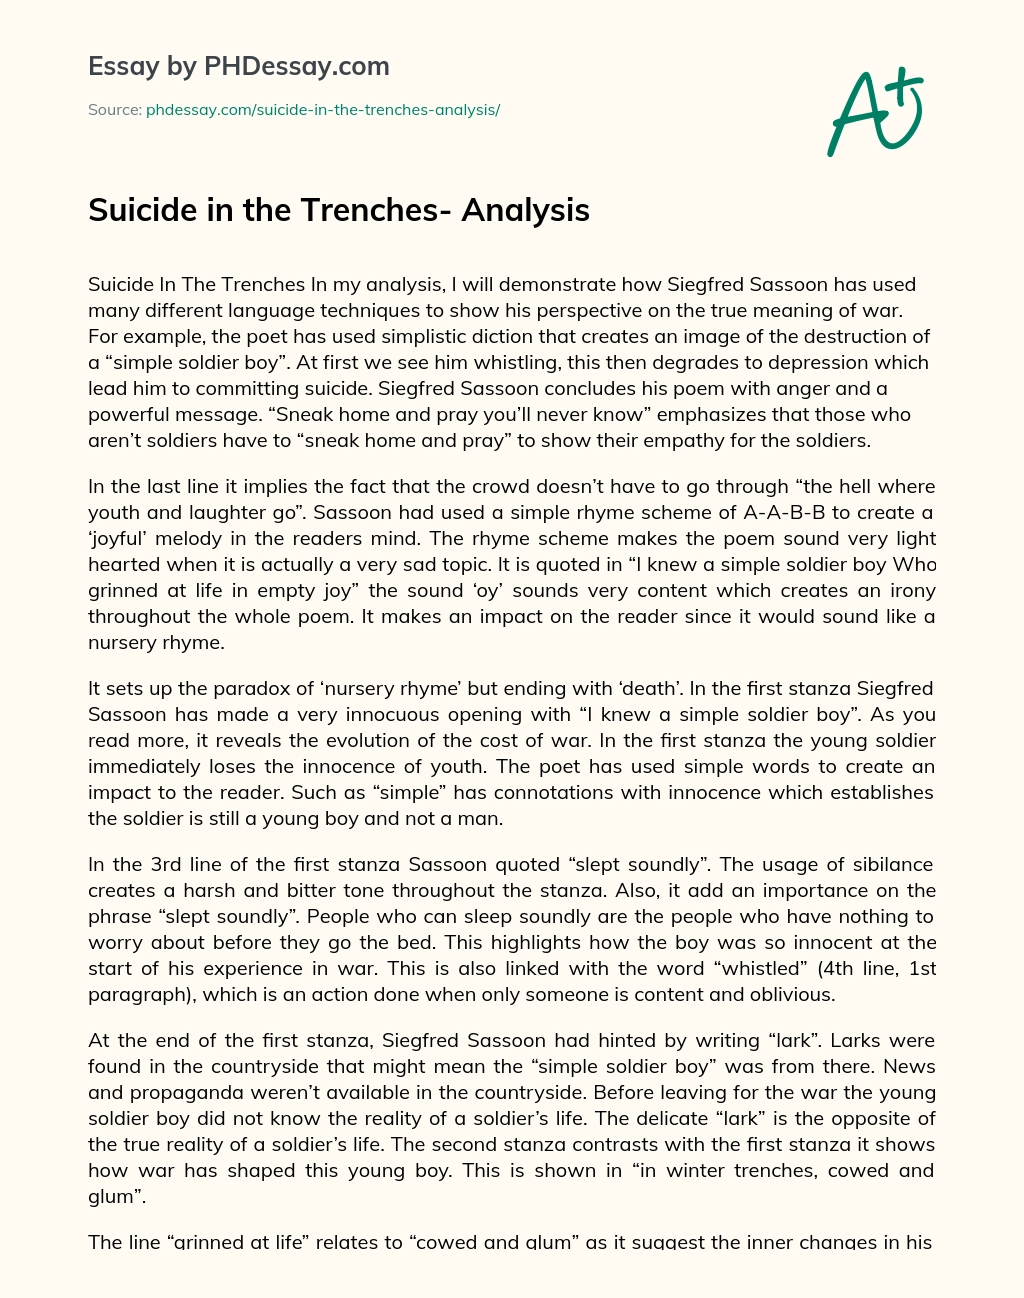 Suicide in the Trenches- Analysis essay